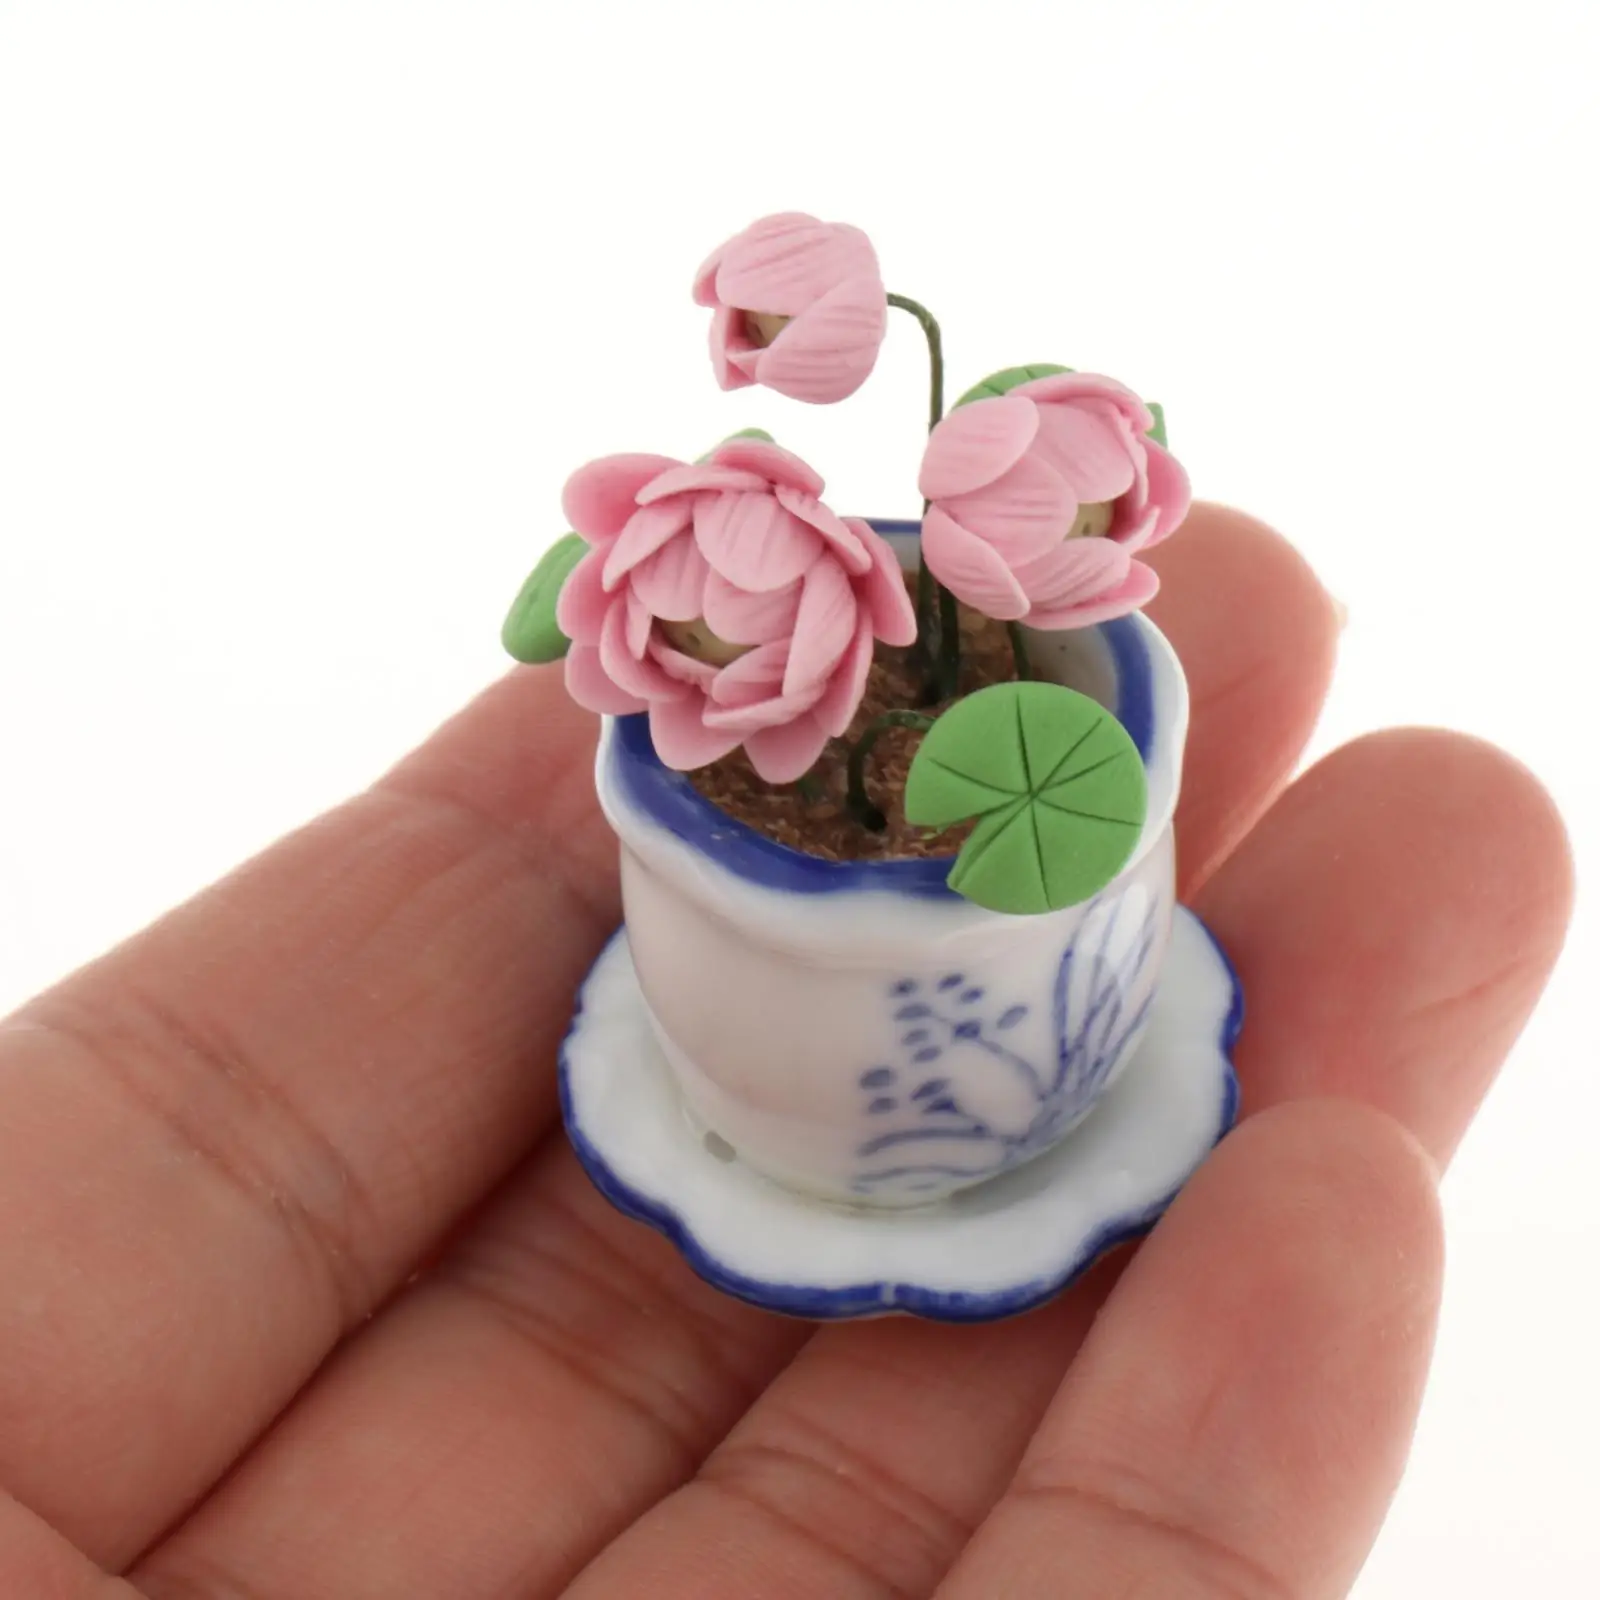 1:12 Dollhouse Lotus Plant Model Ceramic Simulated Flowerpot Model for DIY Scenery DIY Projects Model Train Decoration Building